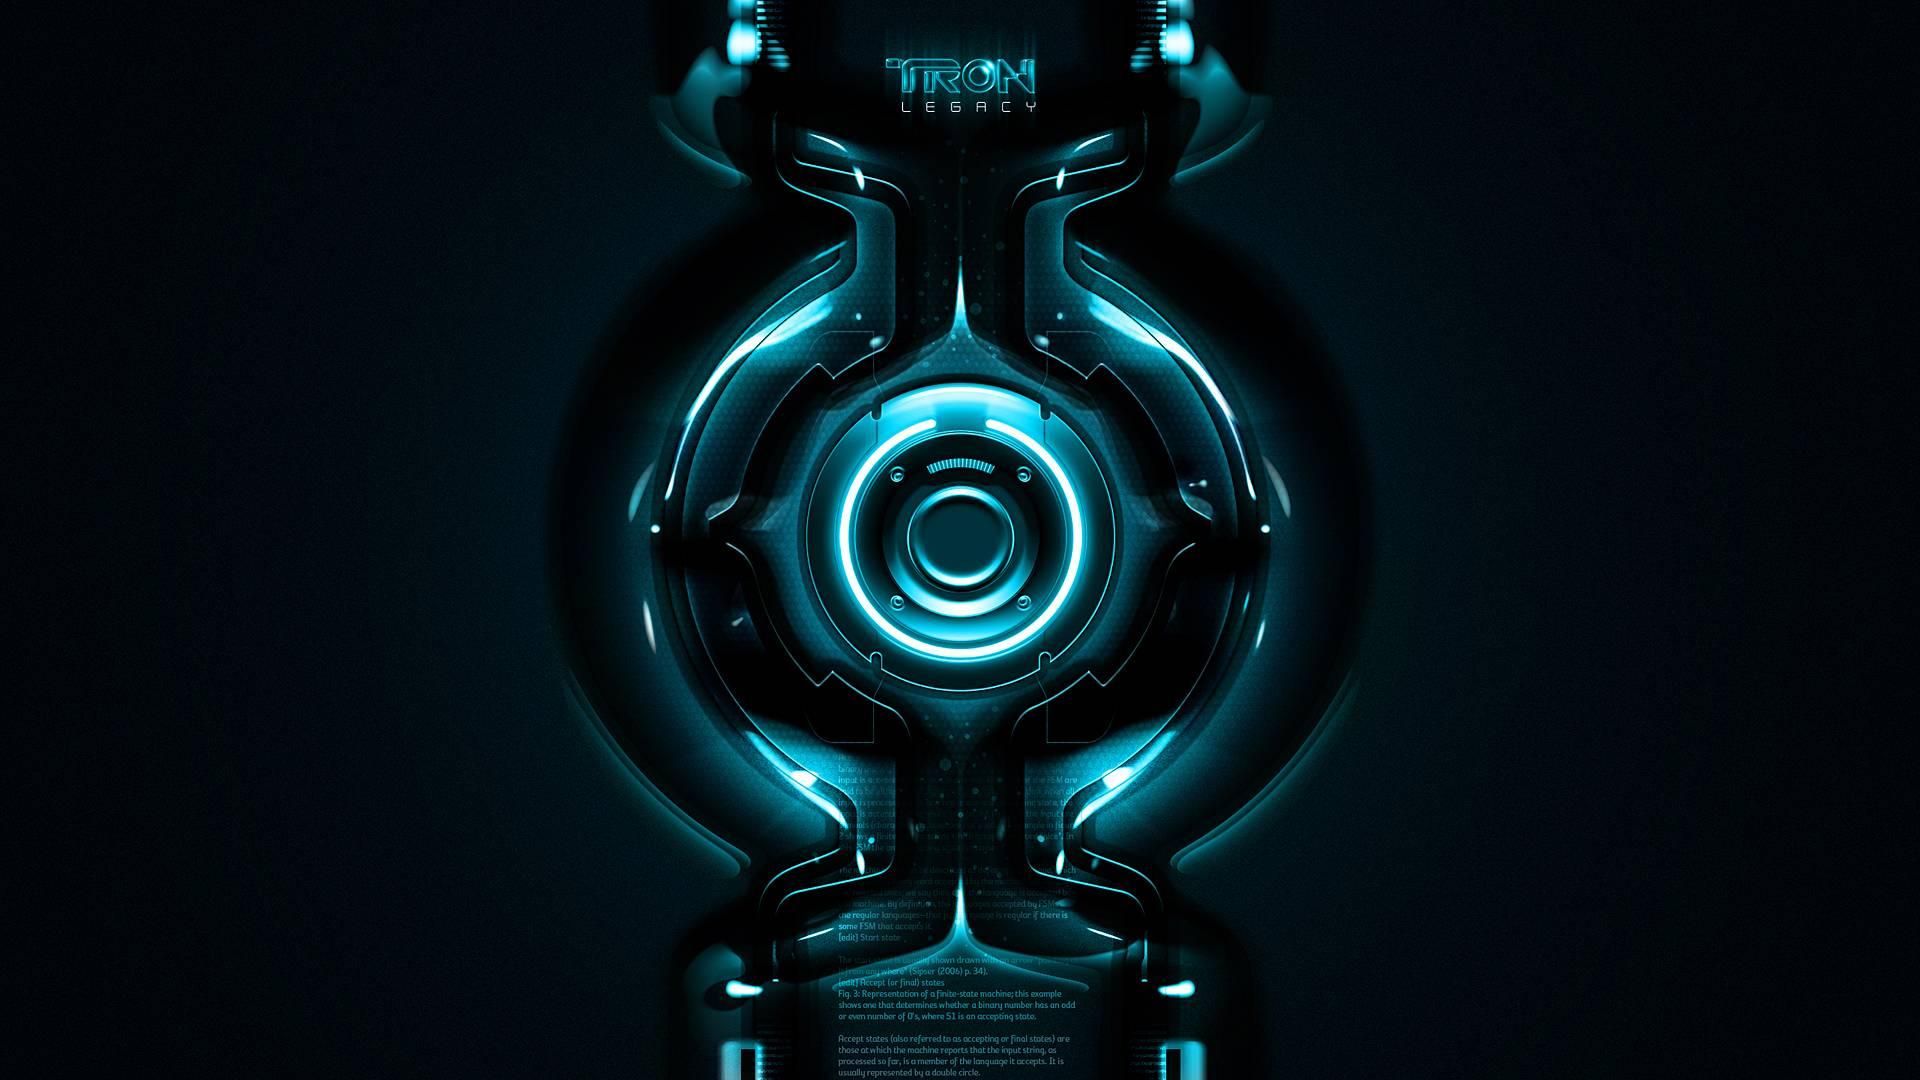 Tron Legacy Archives Hd Wallpapers Free Downloadhd Wallpapers | HD ...